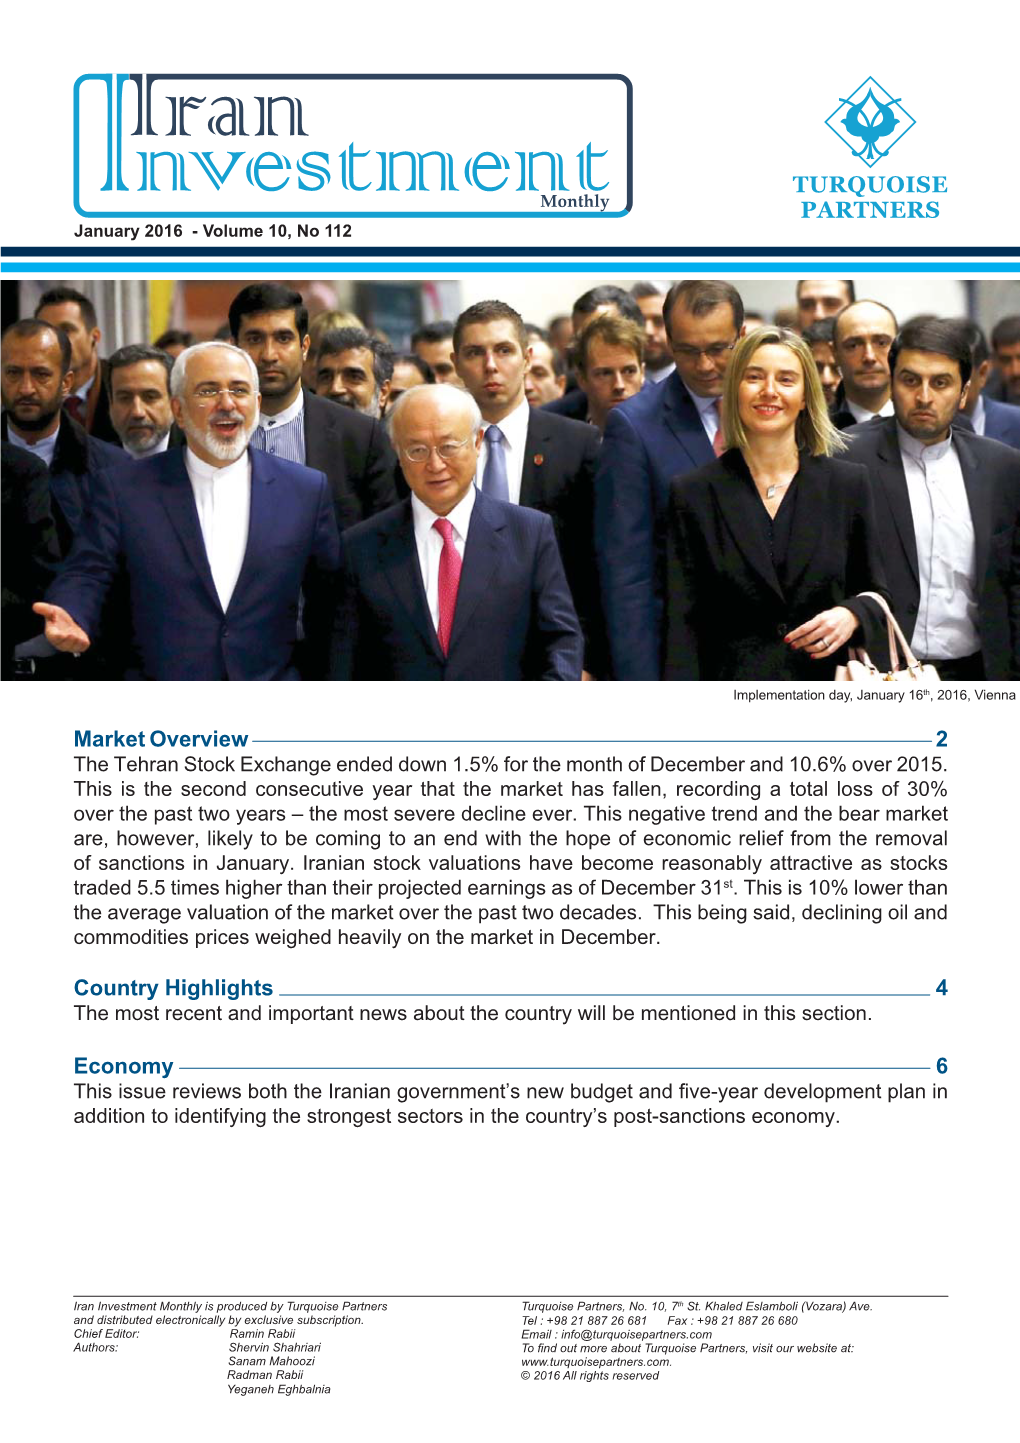 Iran Investment Monthly Jan 2016.Indd